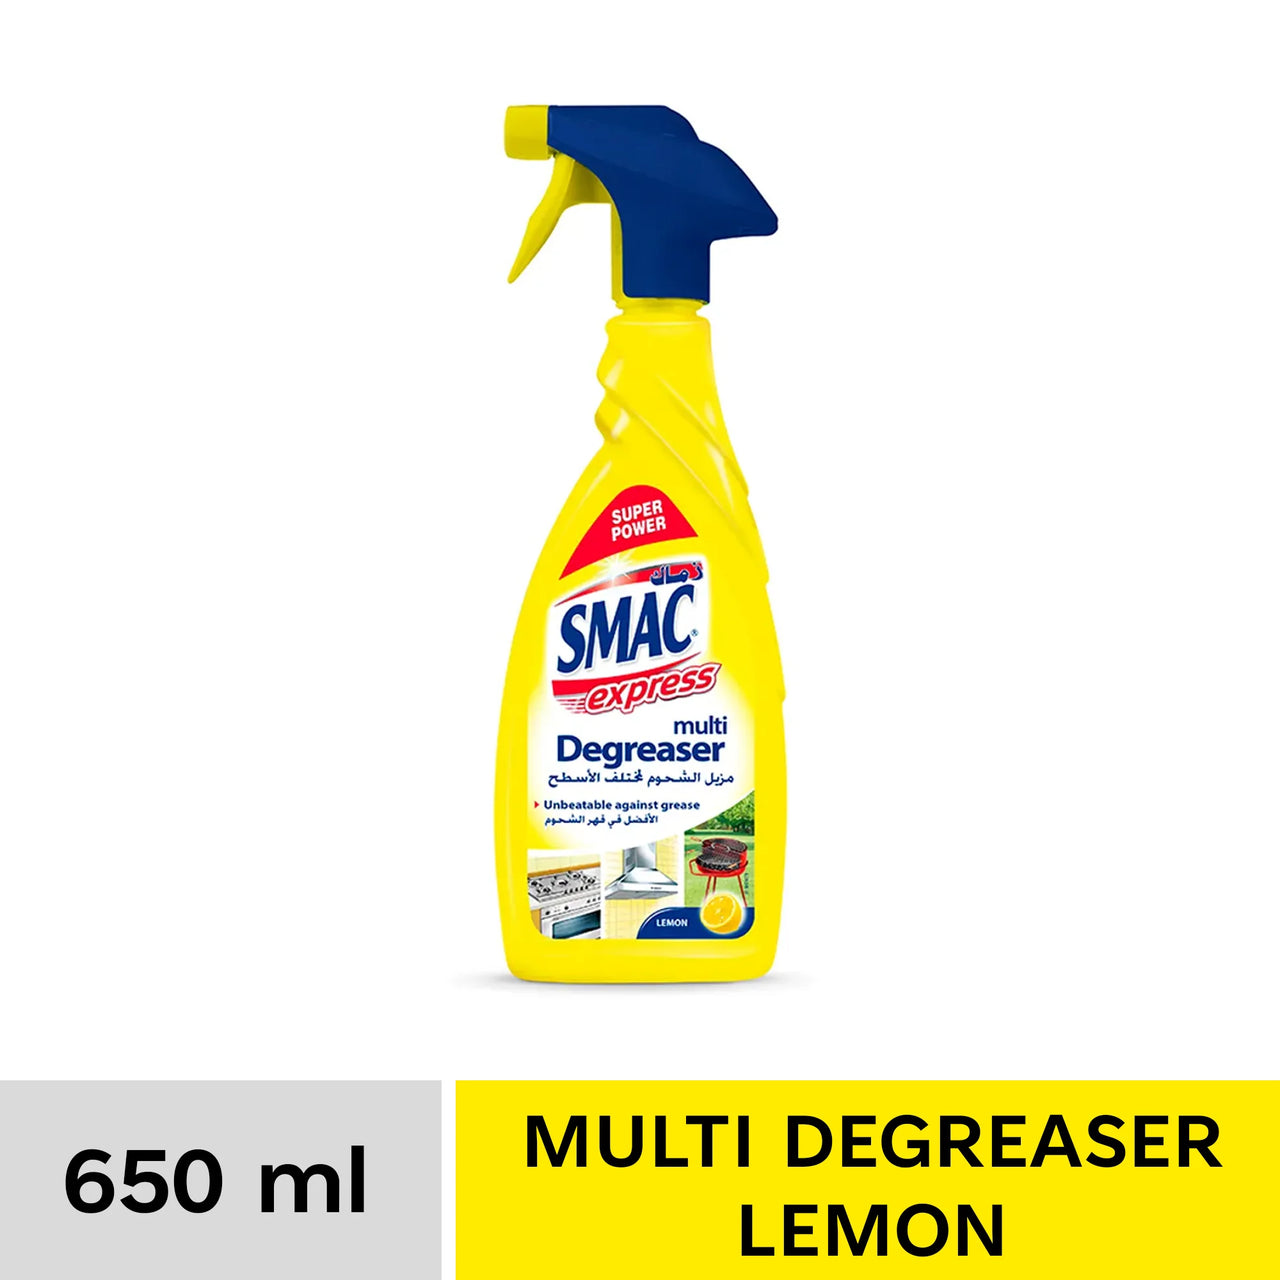 SMAC-Express Degreaser With Lemon-650ml